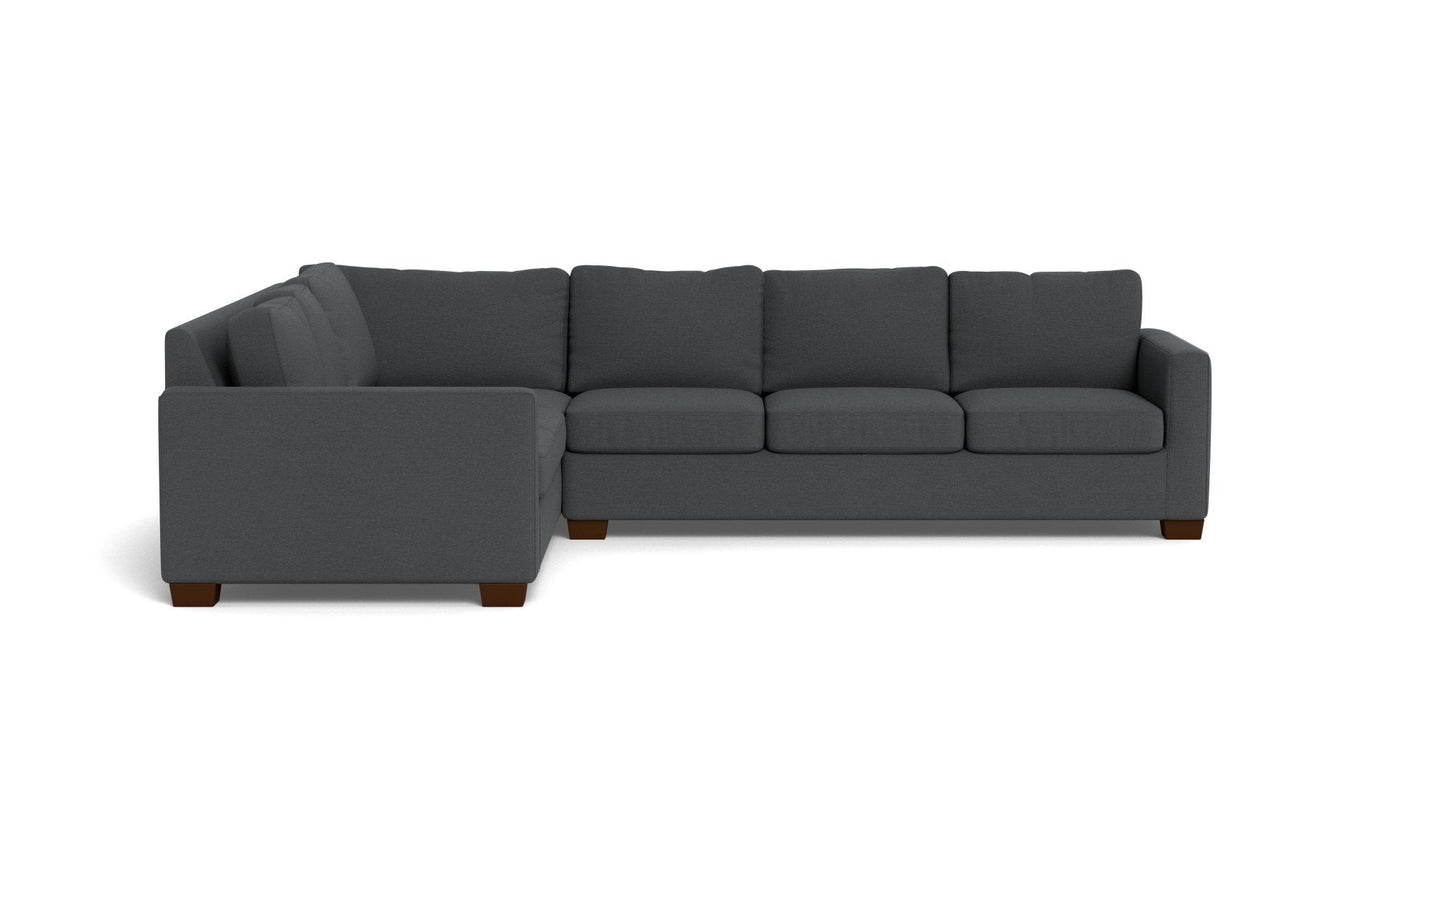 Track Right Sleeper Sofa Sectional - Peyton Pepper